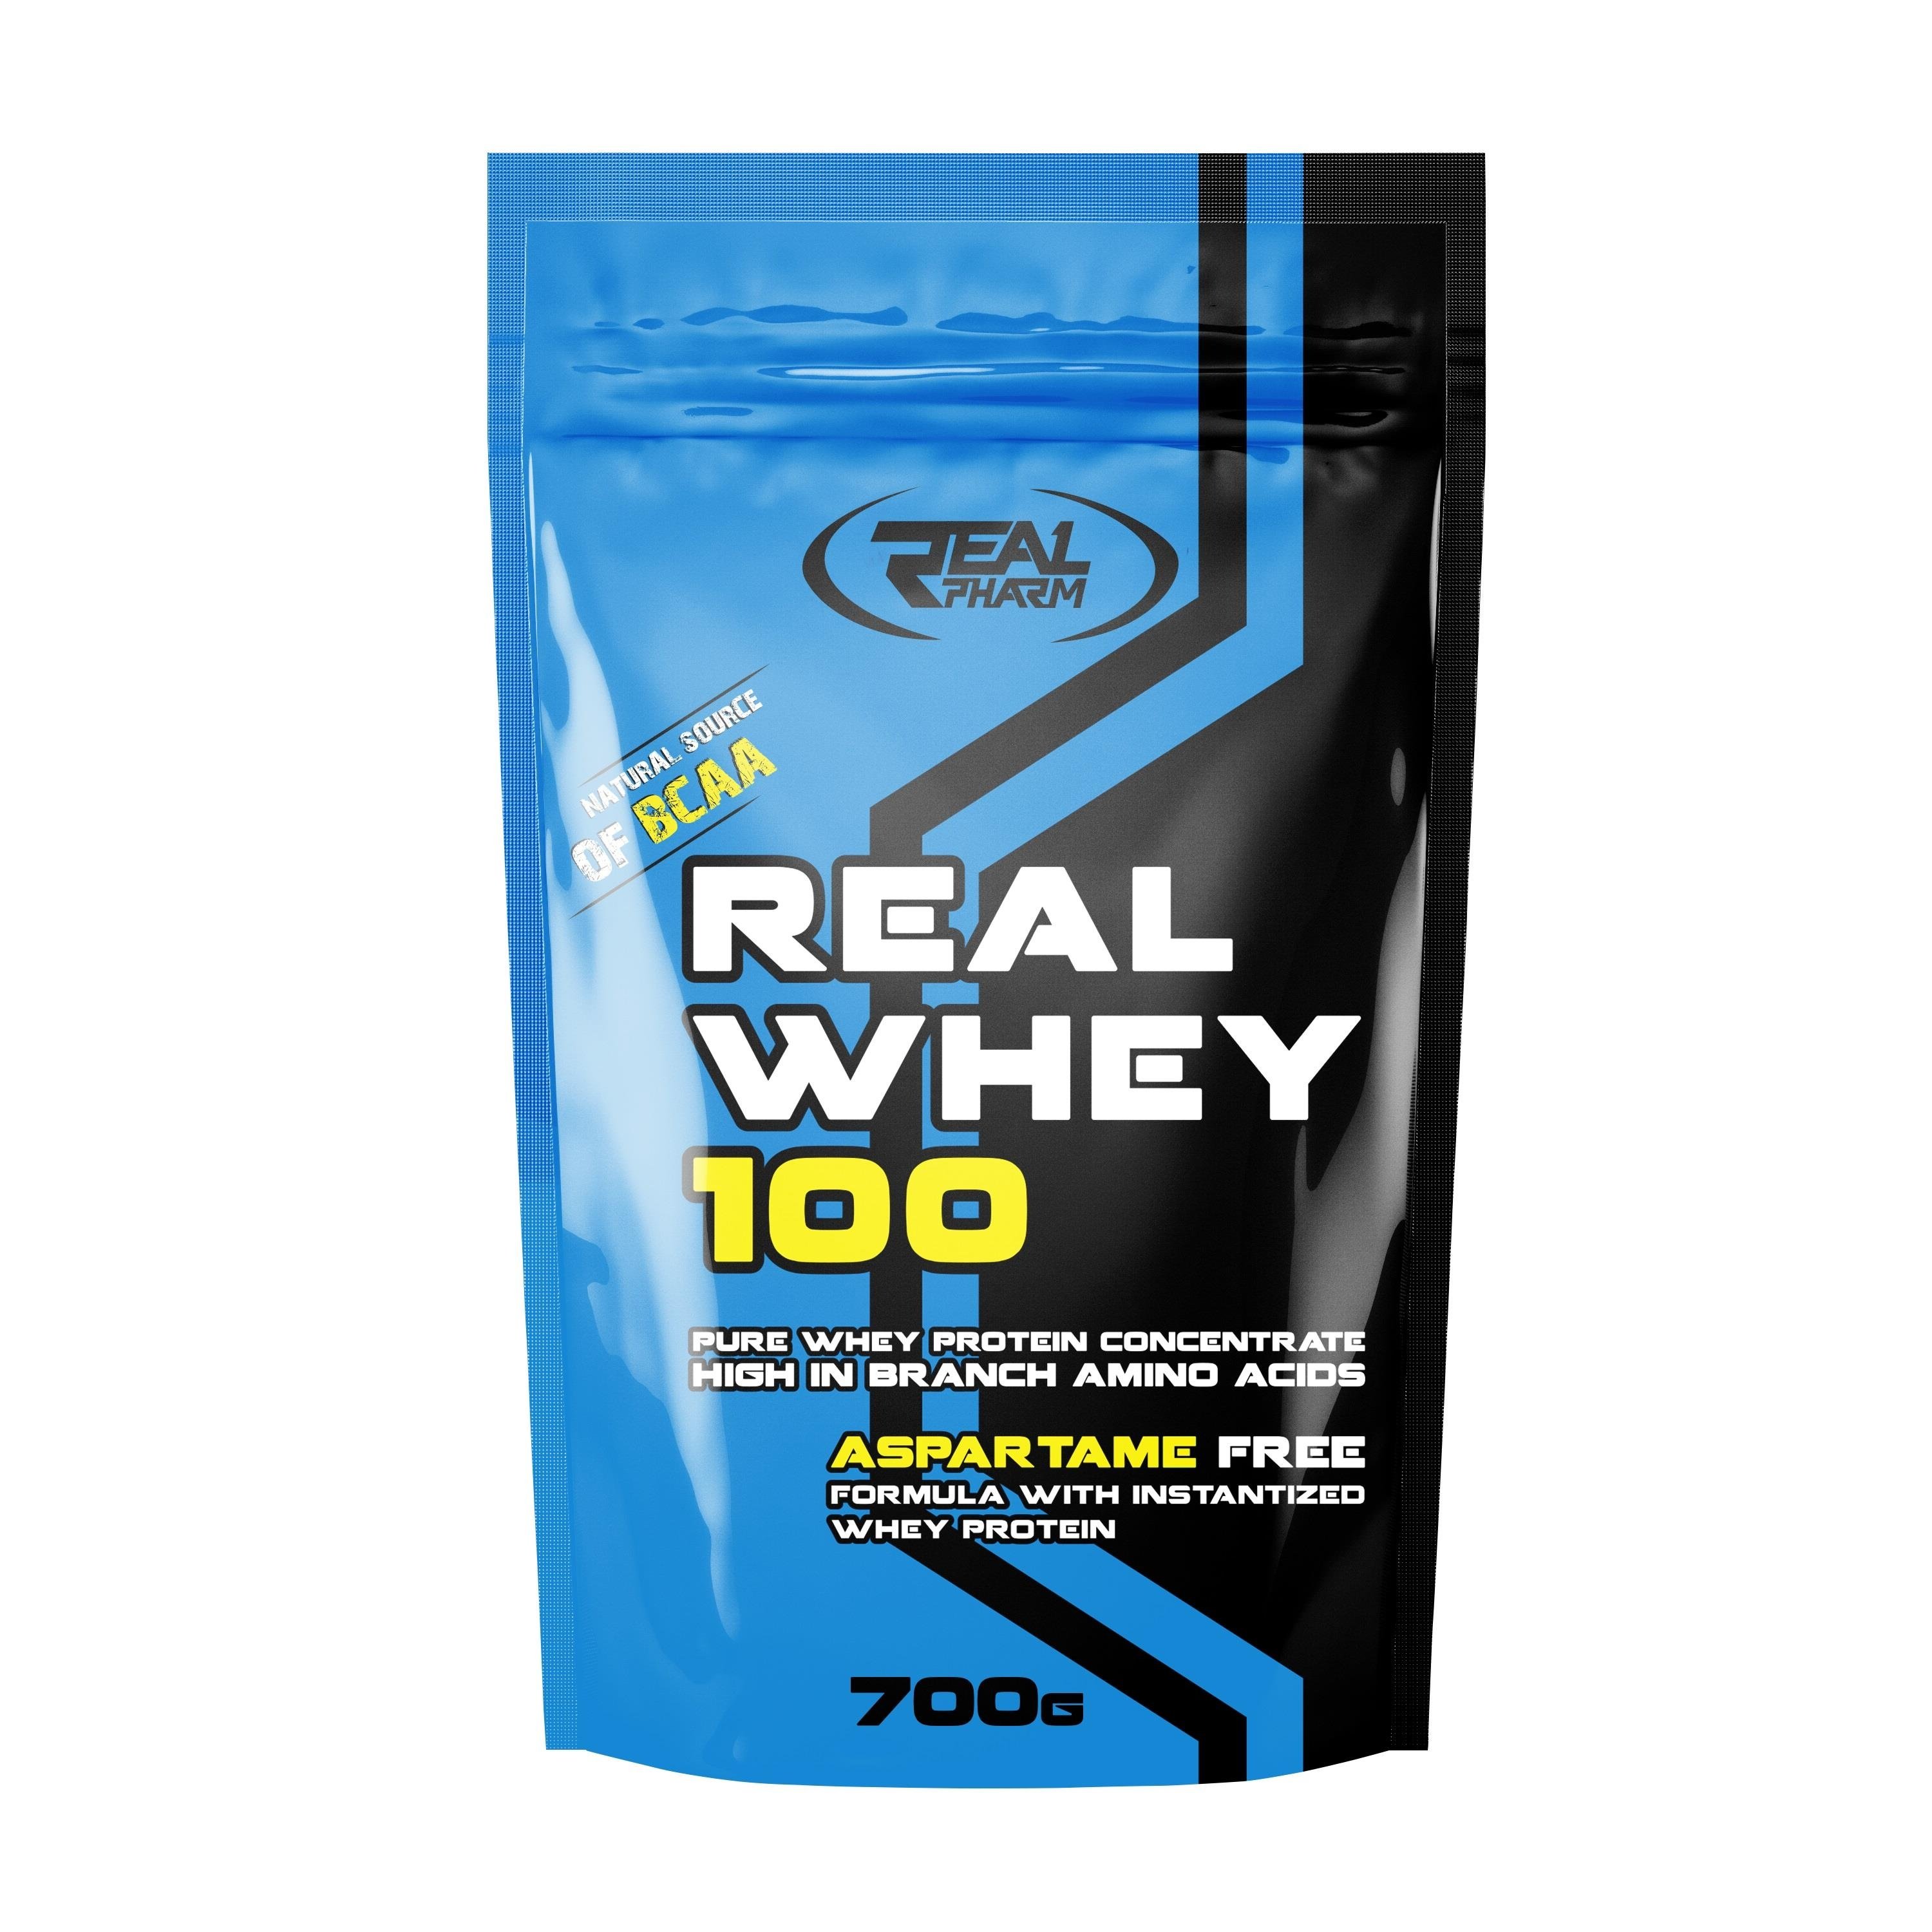 Real Whey 100, 700 g, Real Pharm. Whey Concentrate. Mass Gain recovery Anti-catabolic properties 